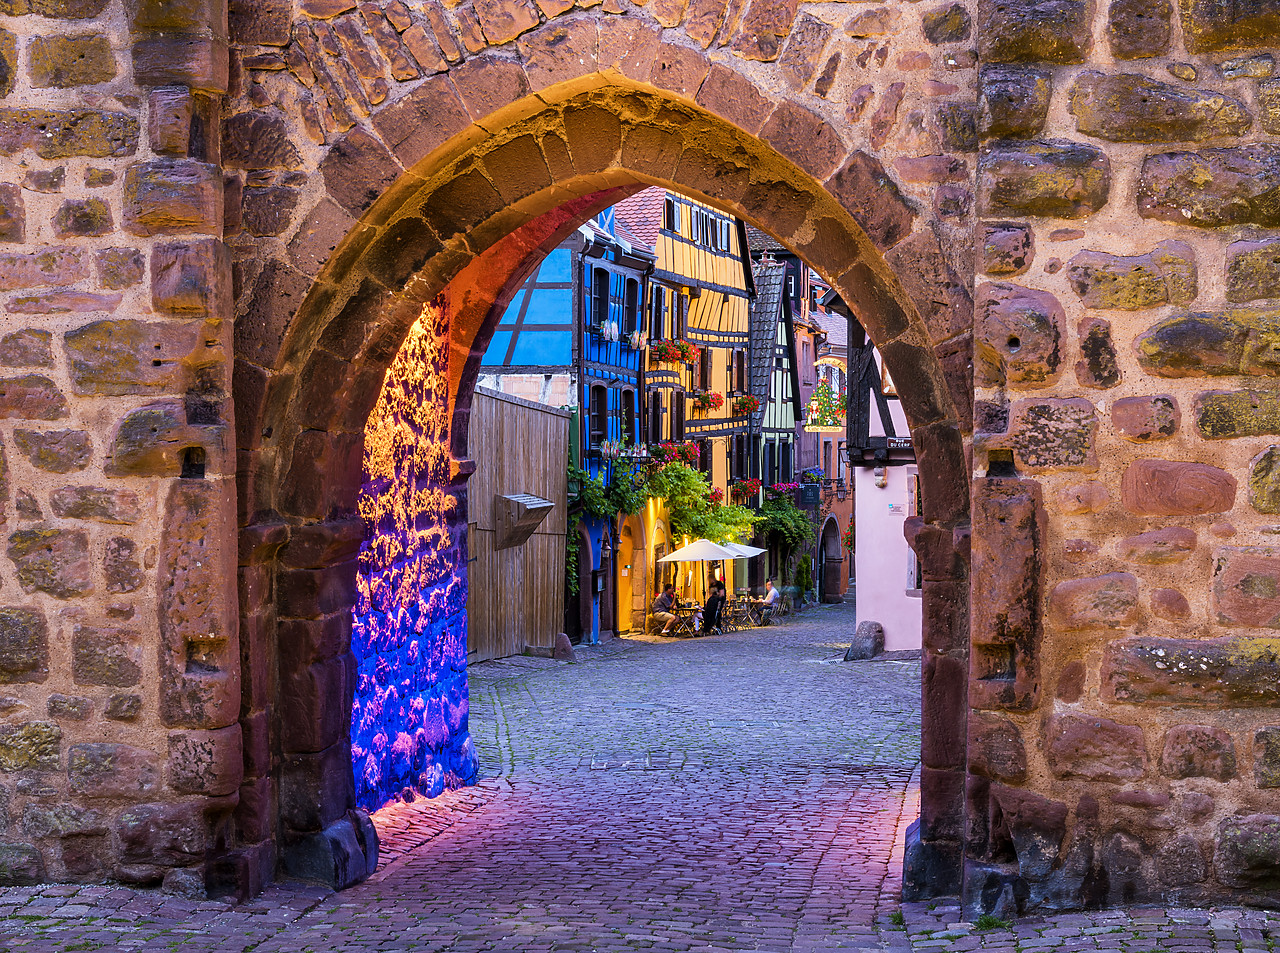 #160284-1 - Gate of Riquewihr at Night, Alsace, France